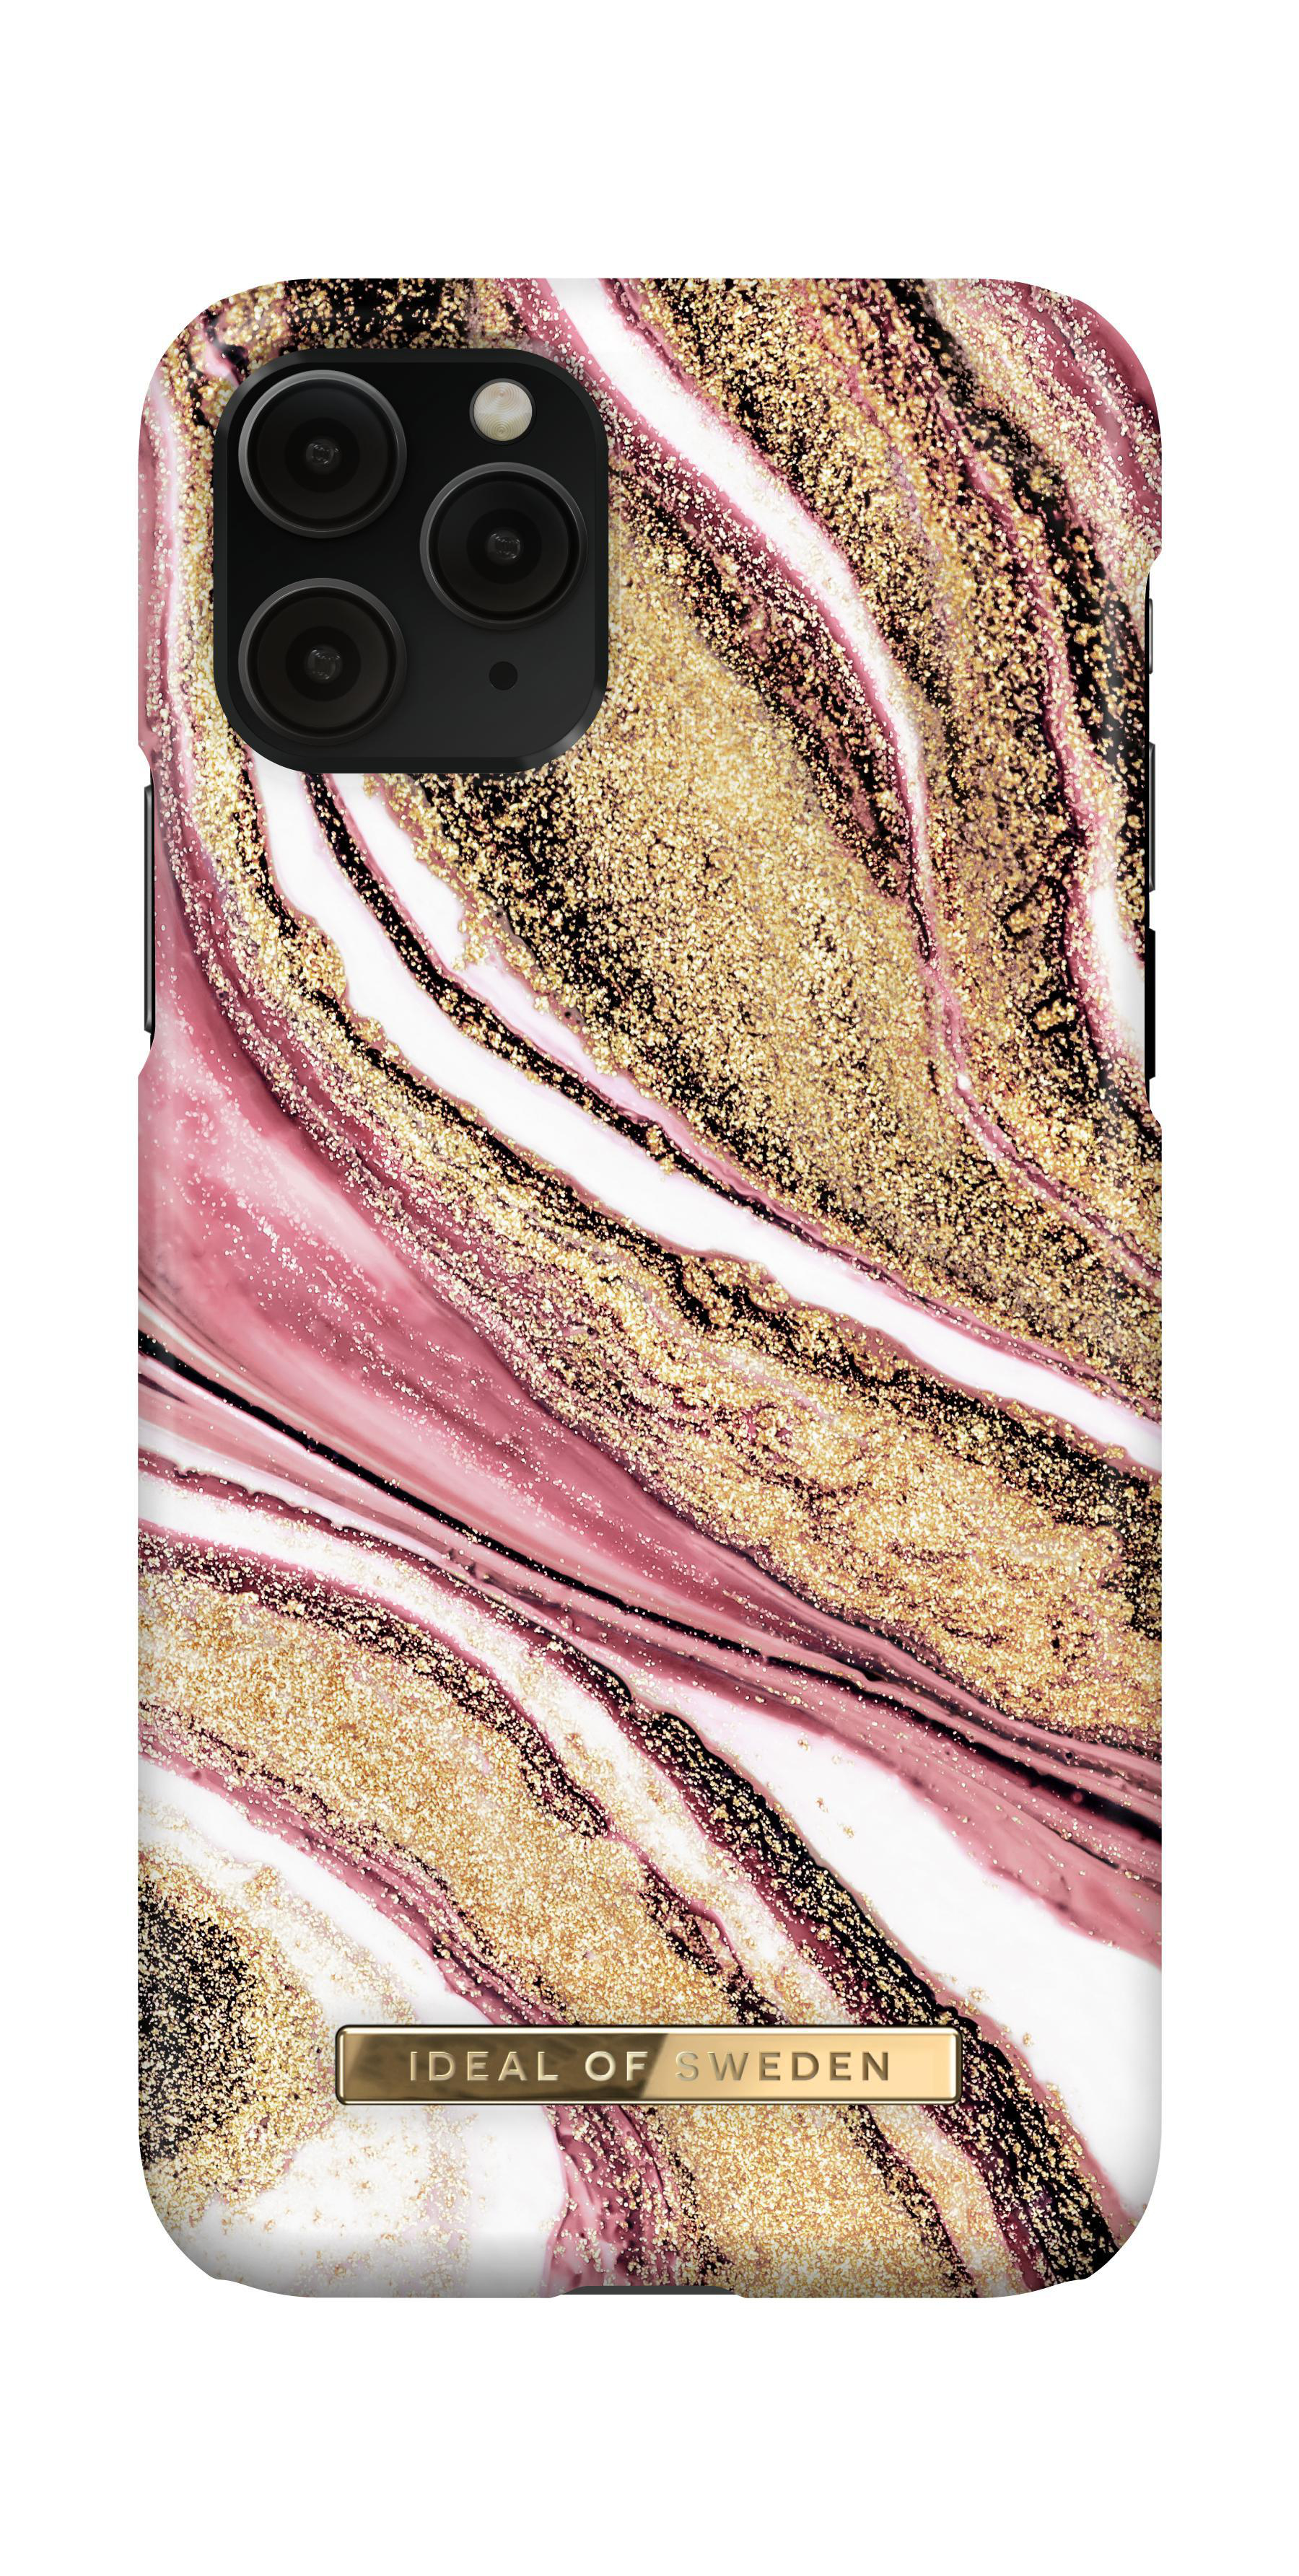 Fashion, SWEDEN IDEAL iPhone Pro, X, Apple, OF iPhone XS, Pink 11 iPhone Backcover,